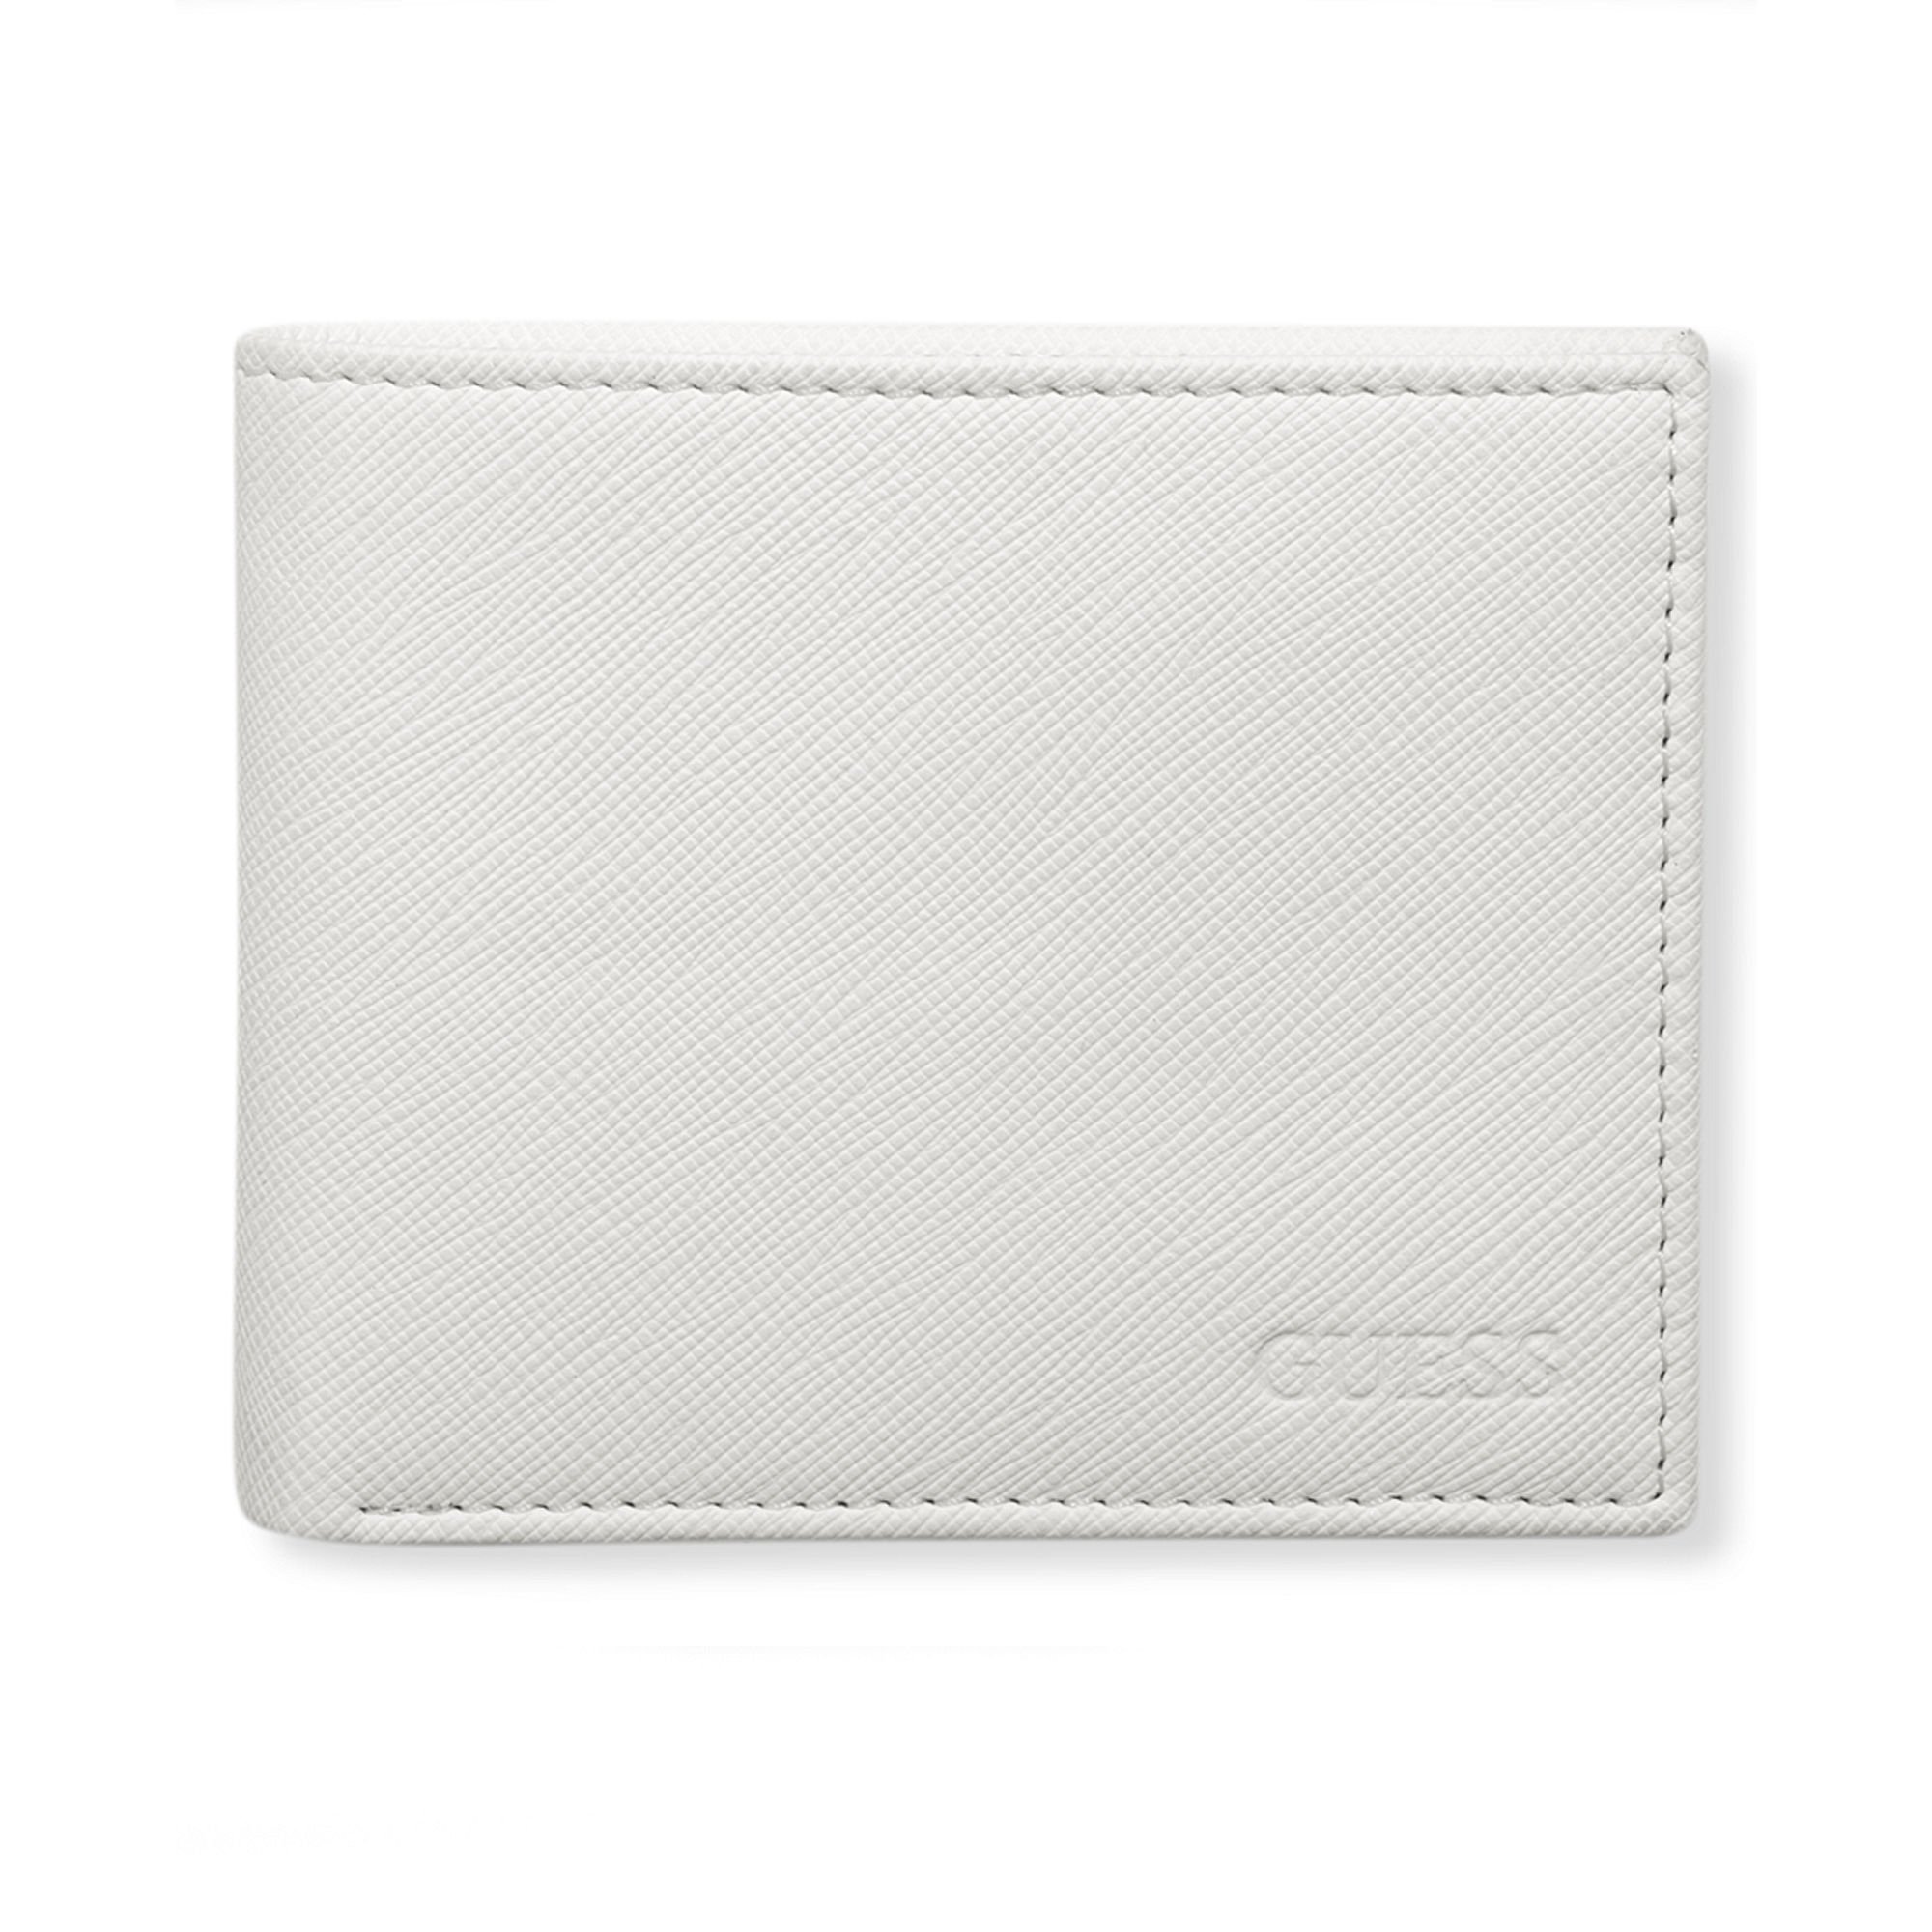 Guess Mens Wallets Online - Guess Outlet Singapore